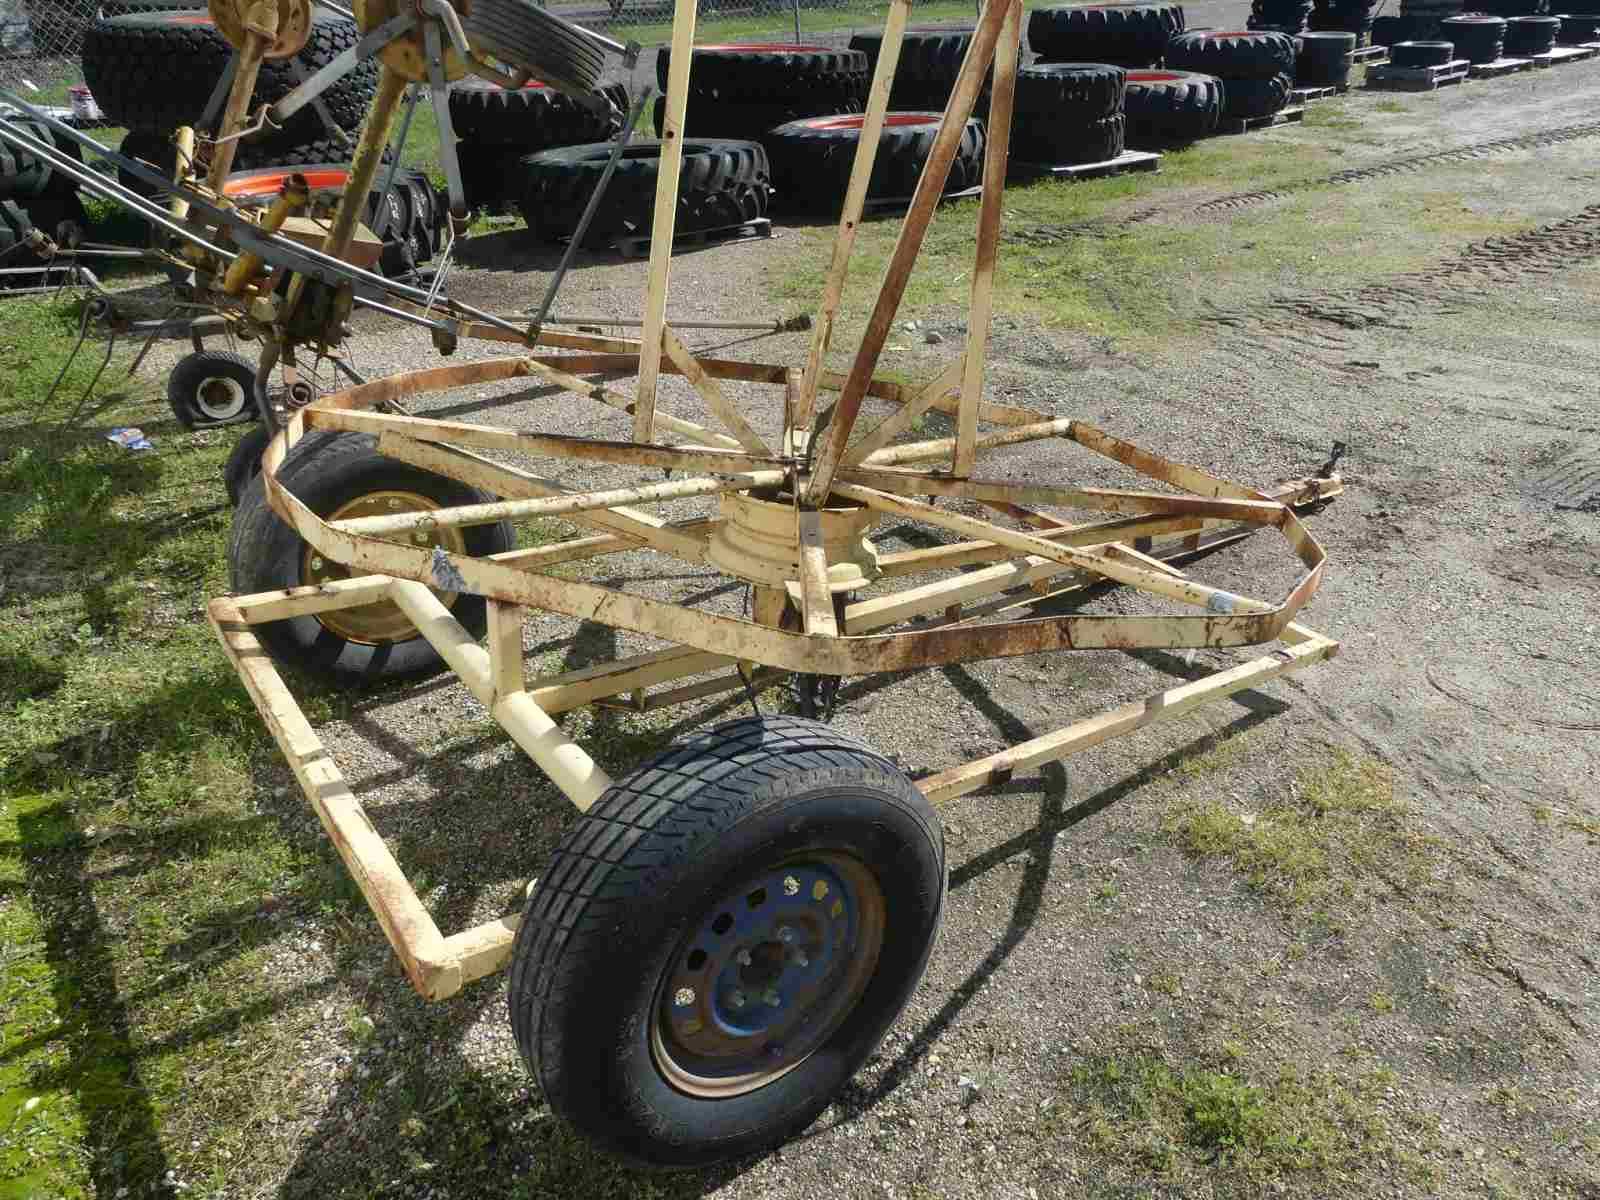 Spool Trailer (No Title - Bill of Sale Only): S/A